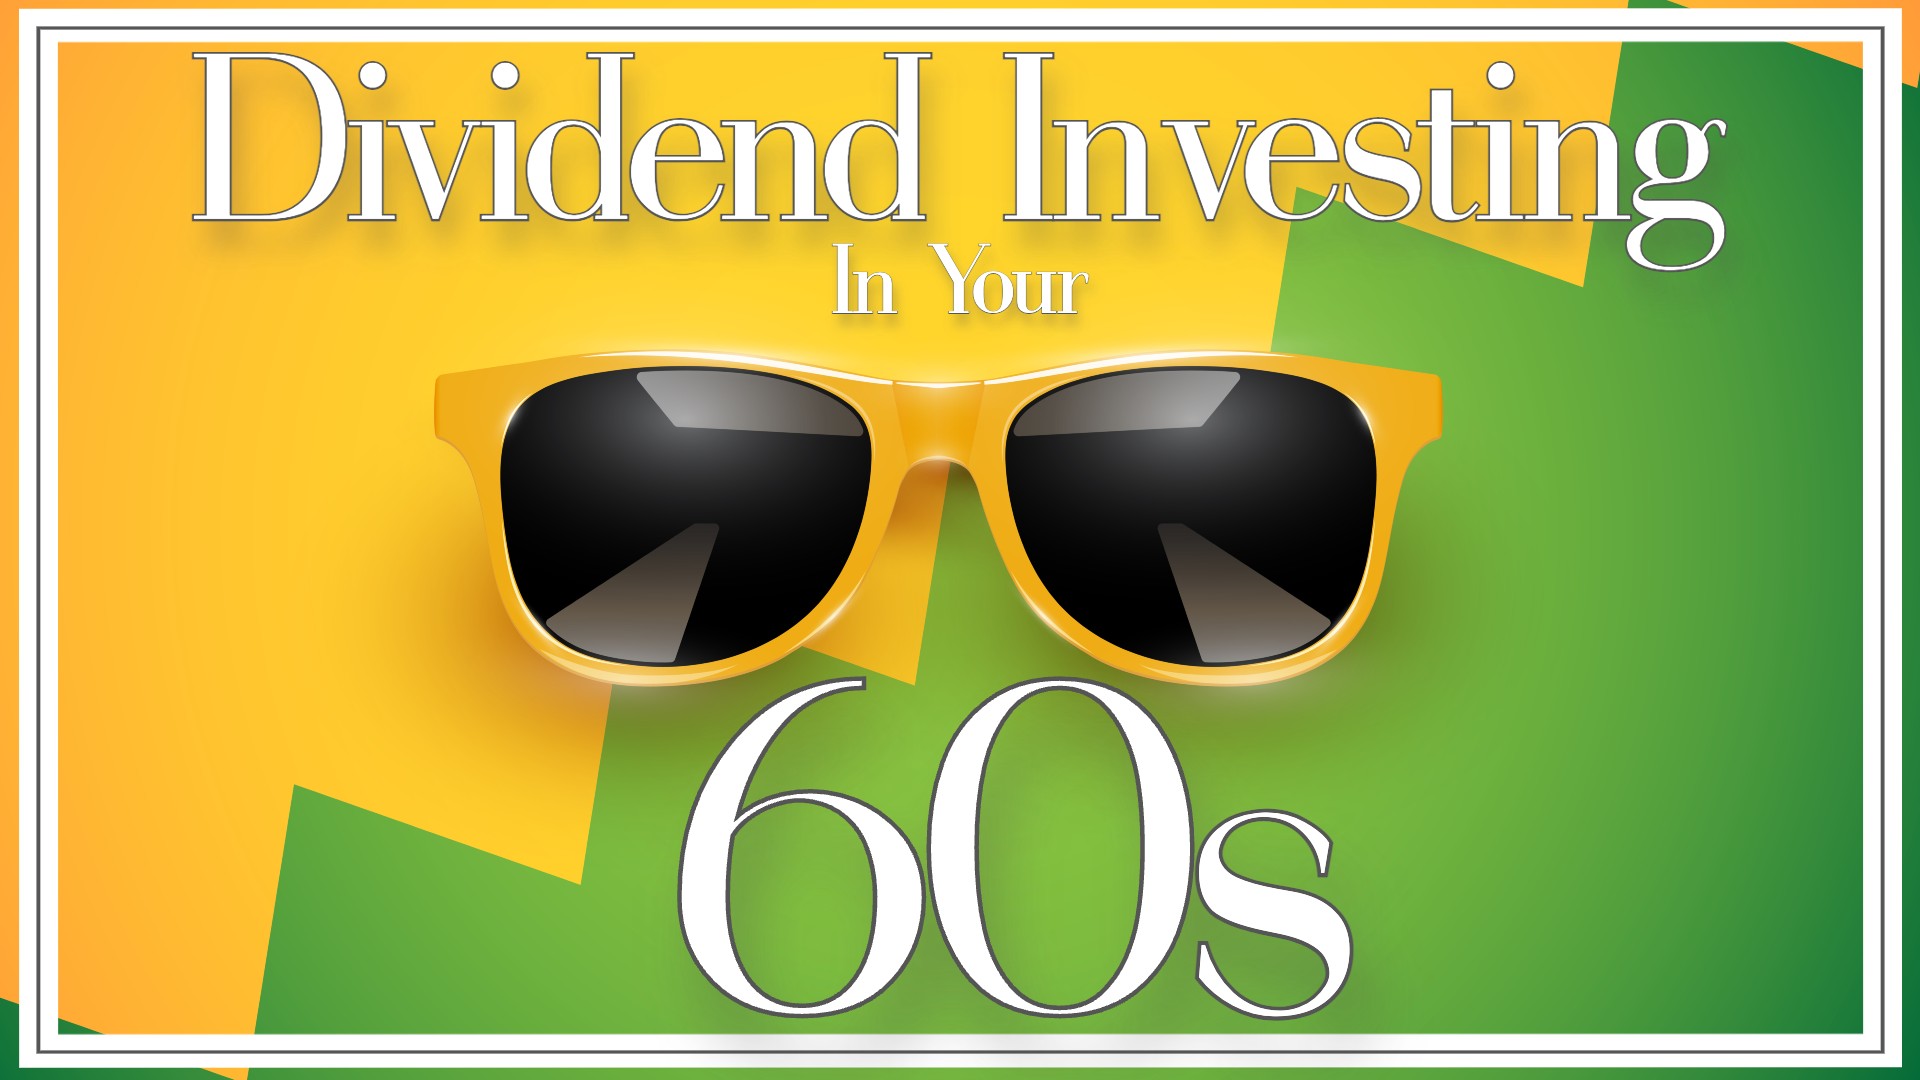 Dividend Investing in Your 60s